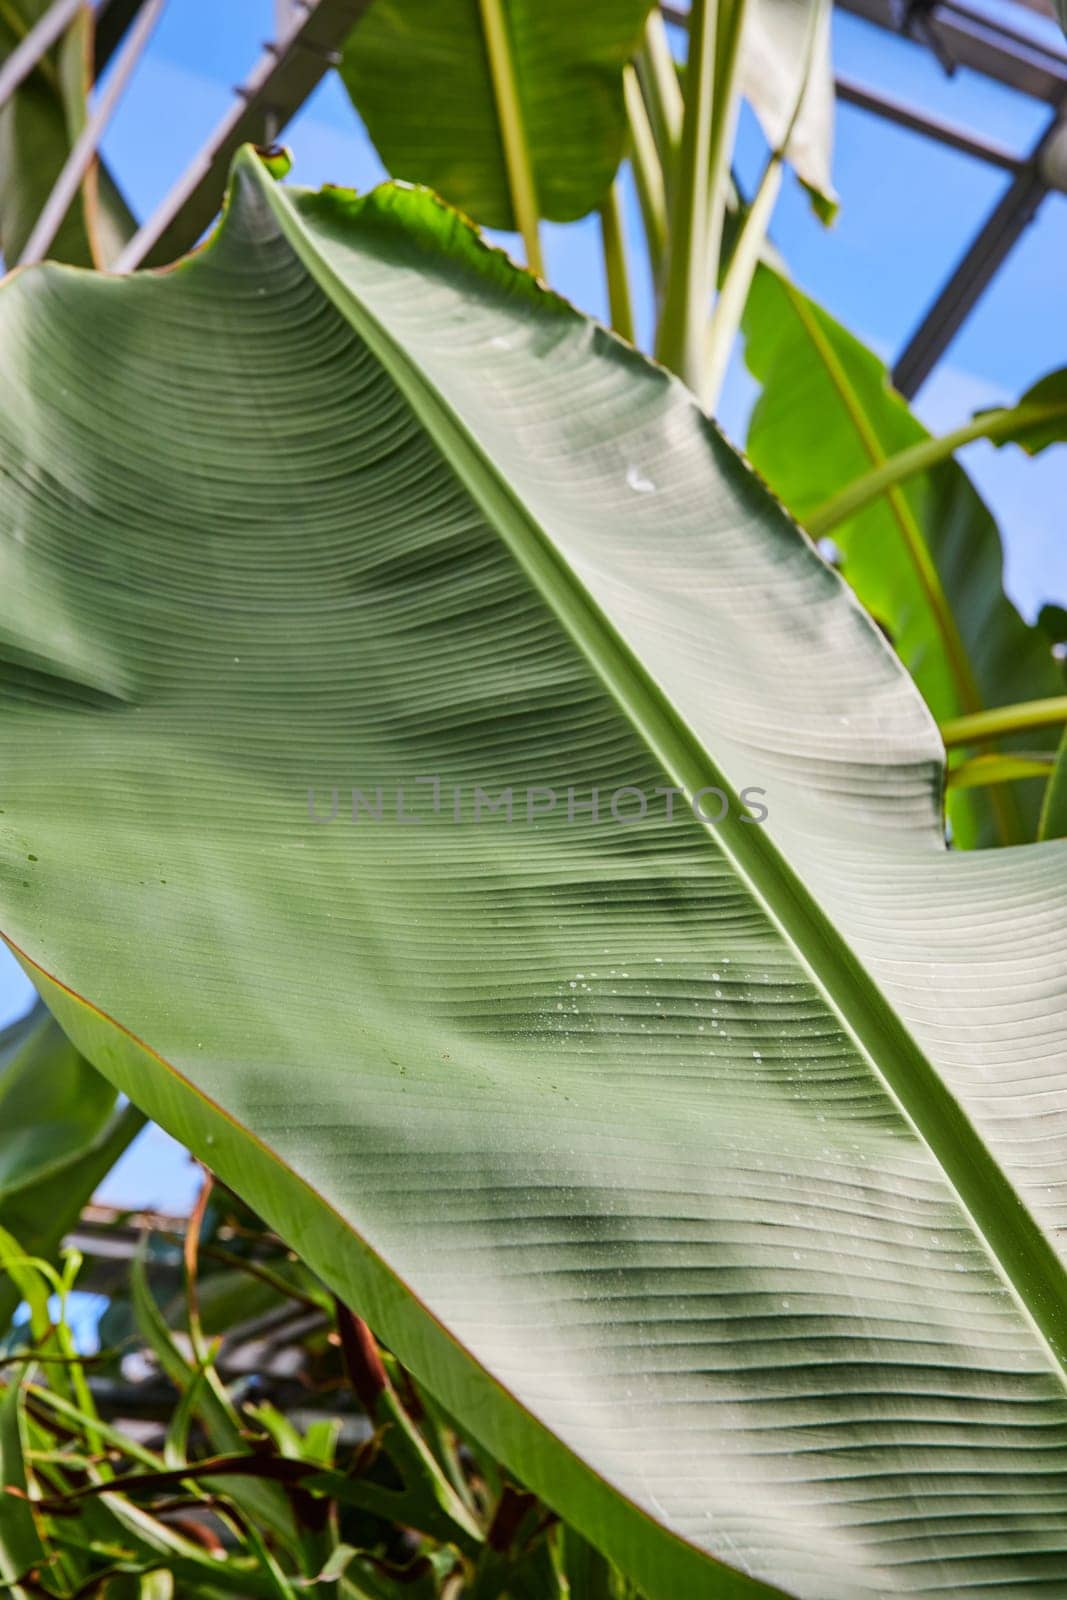 Vibrant Green Banana Leaf Under Bright Sunlight in Indiana Greenhouse, 2023